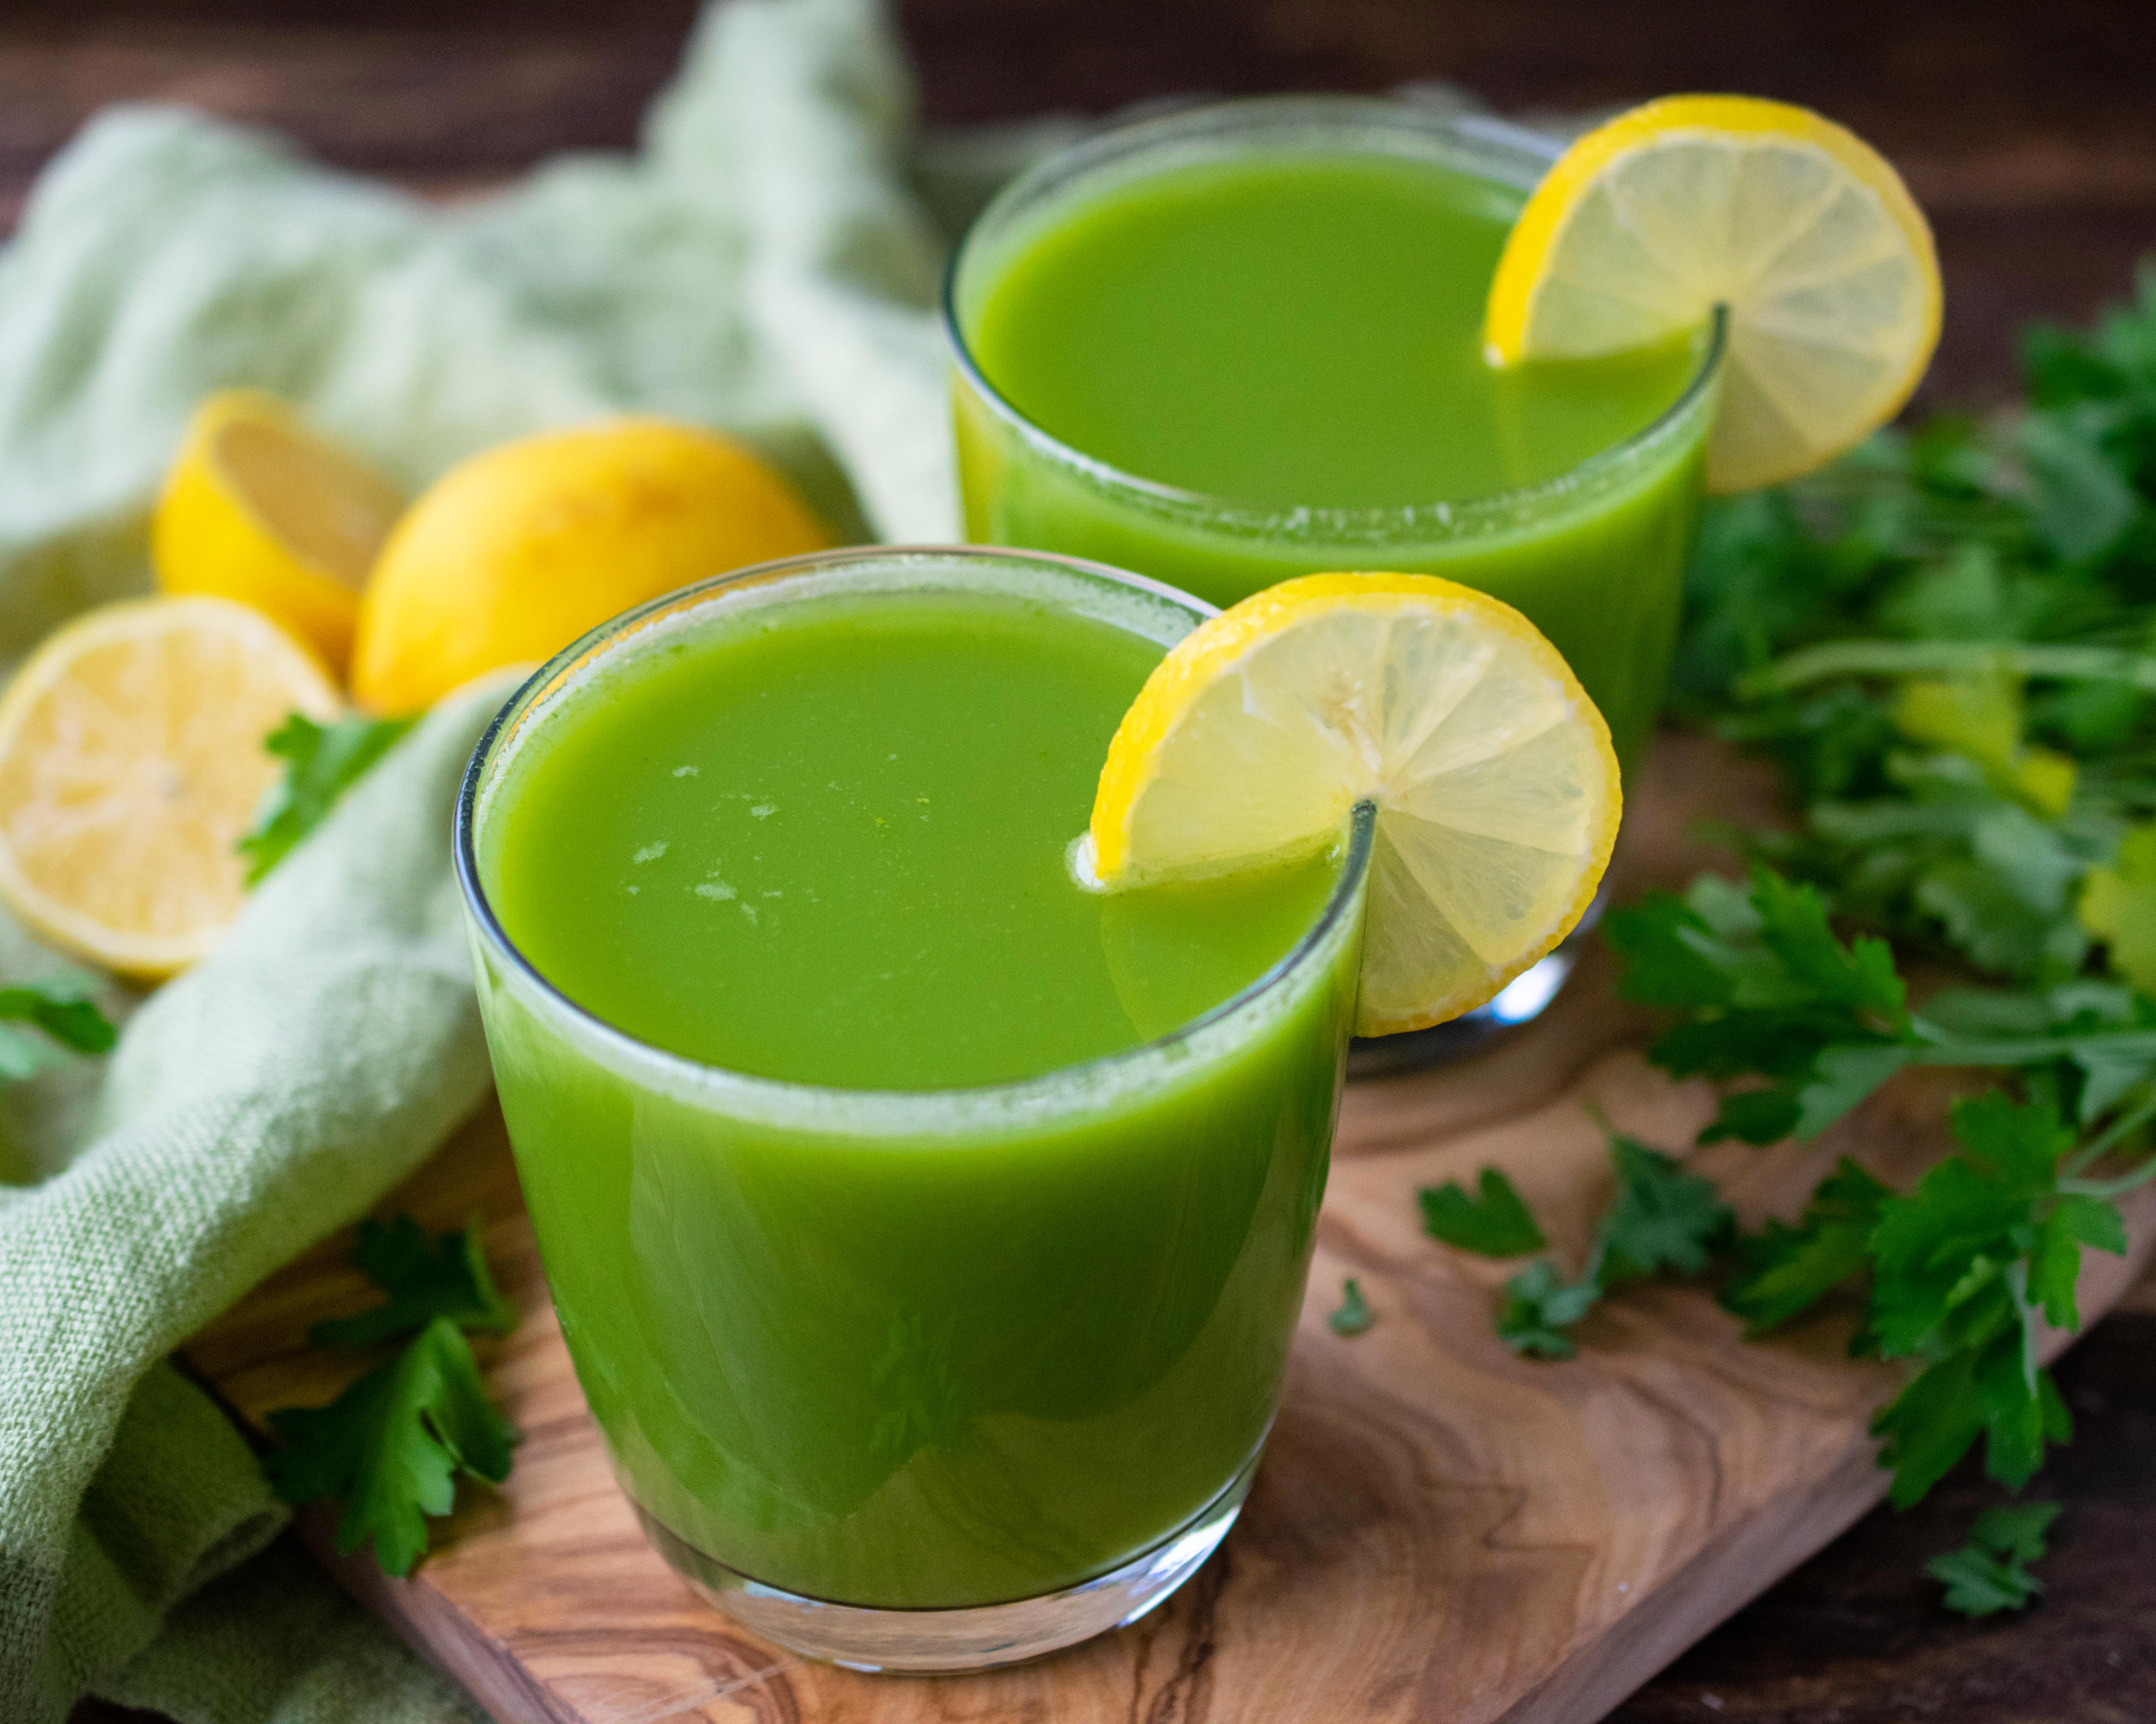 green juice 1 1 of 1 - Myths About Liver Cleanse